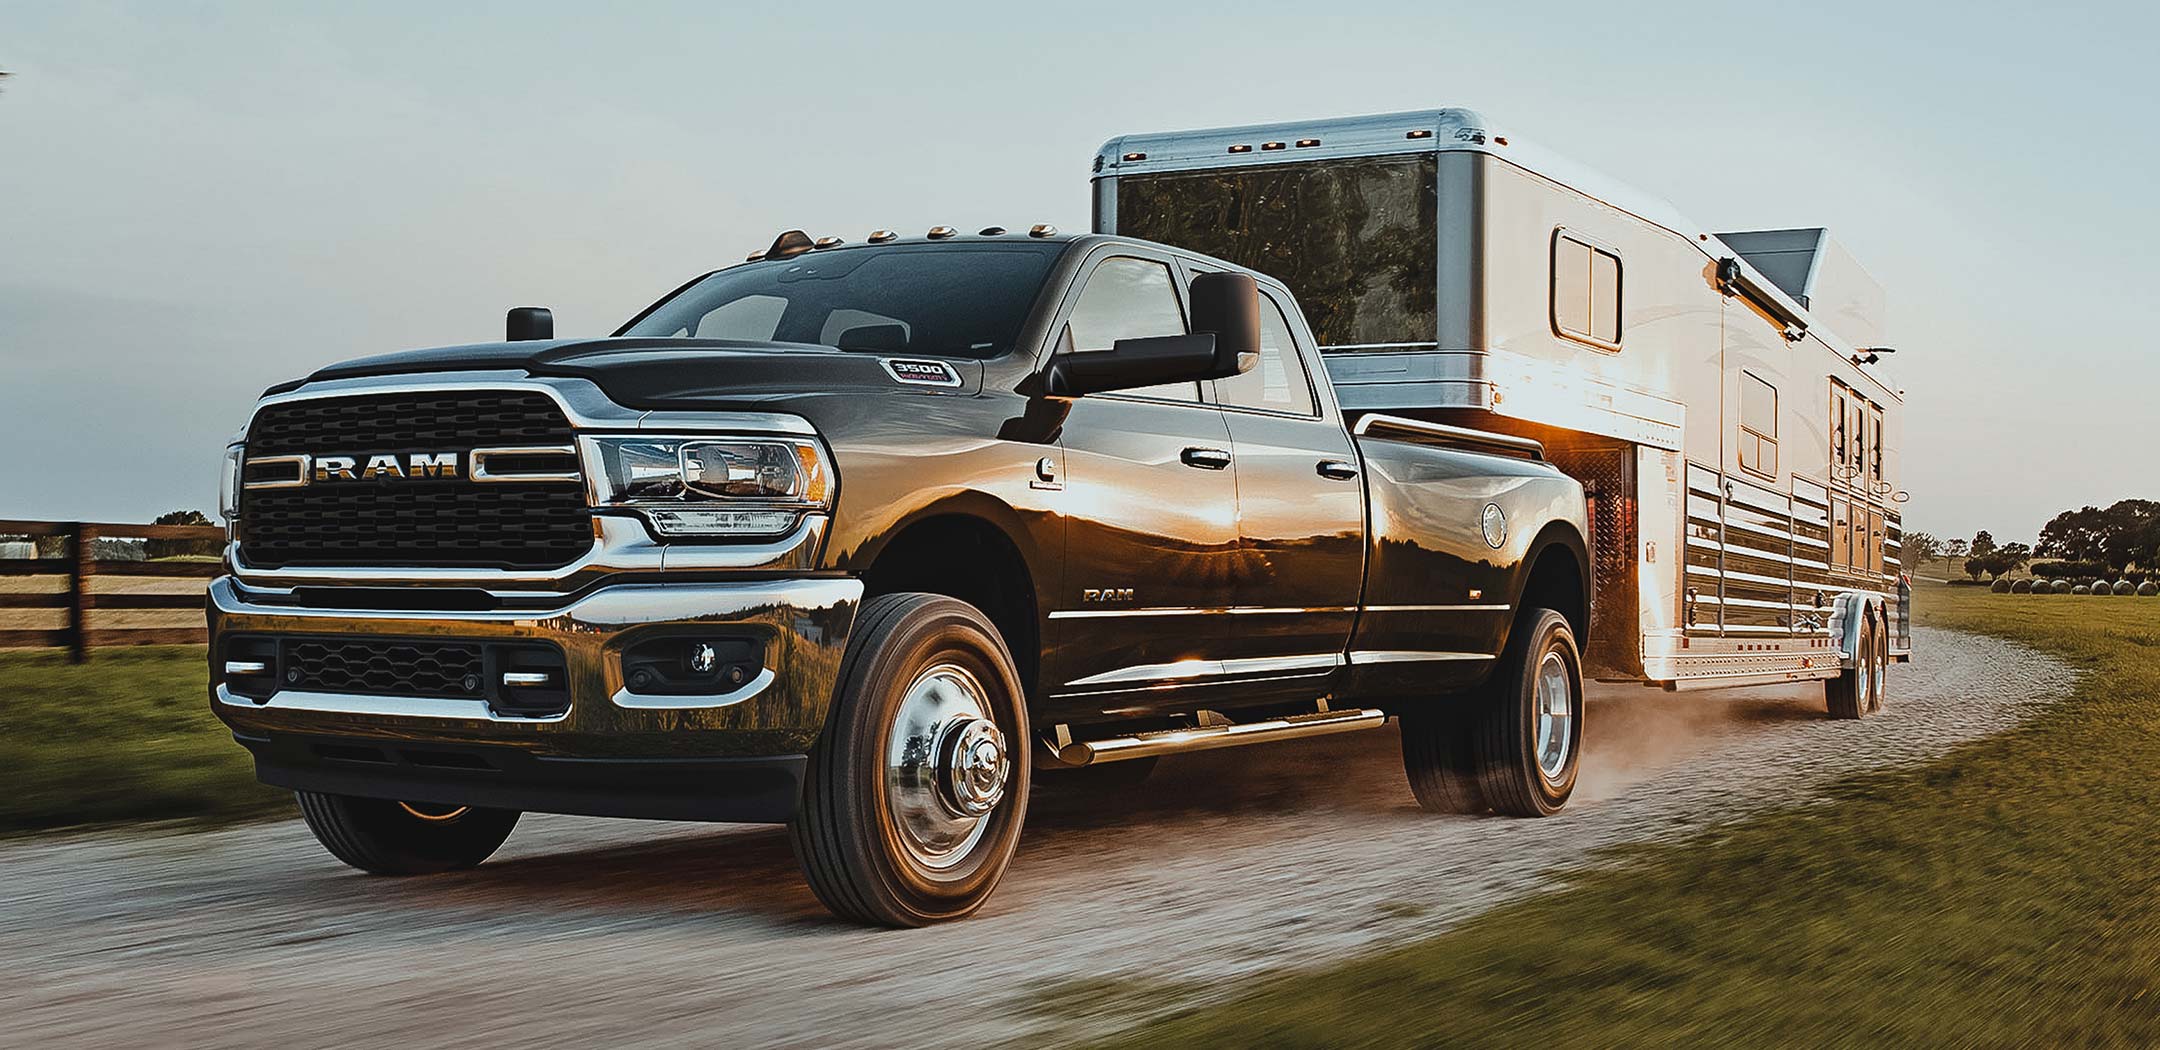 Display The 2022 Ram 3500 pulling a horse trailer on a gravel road.